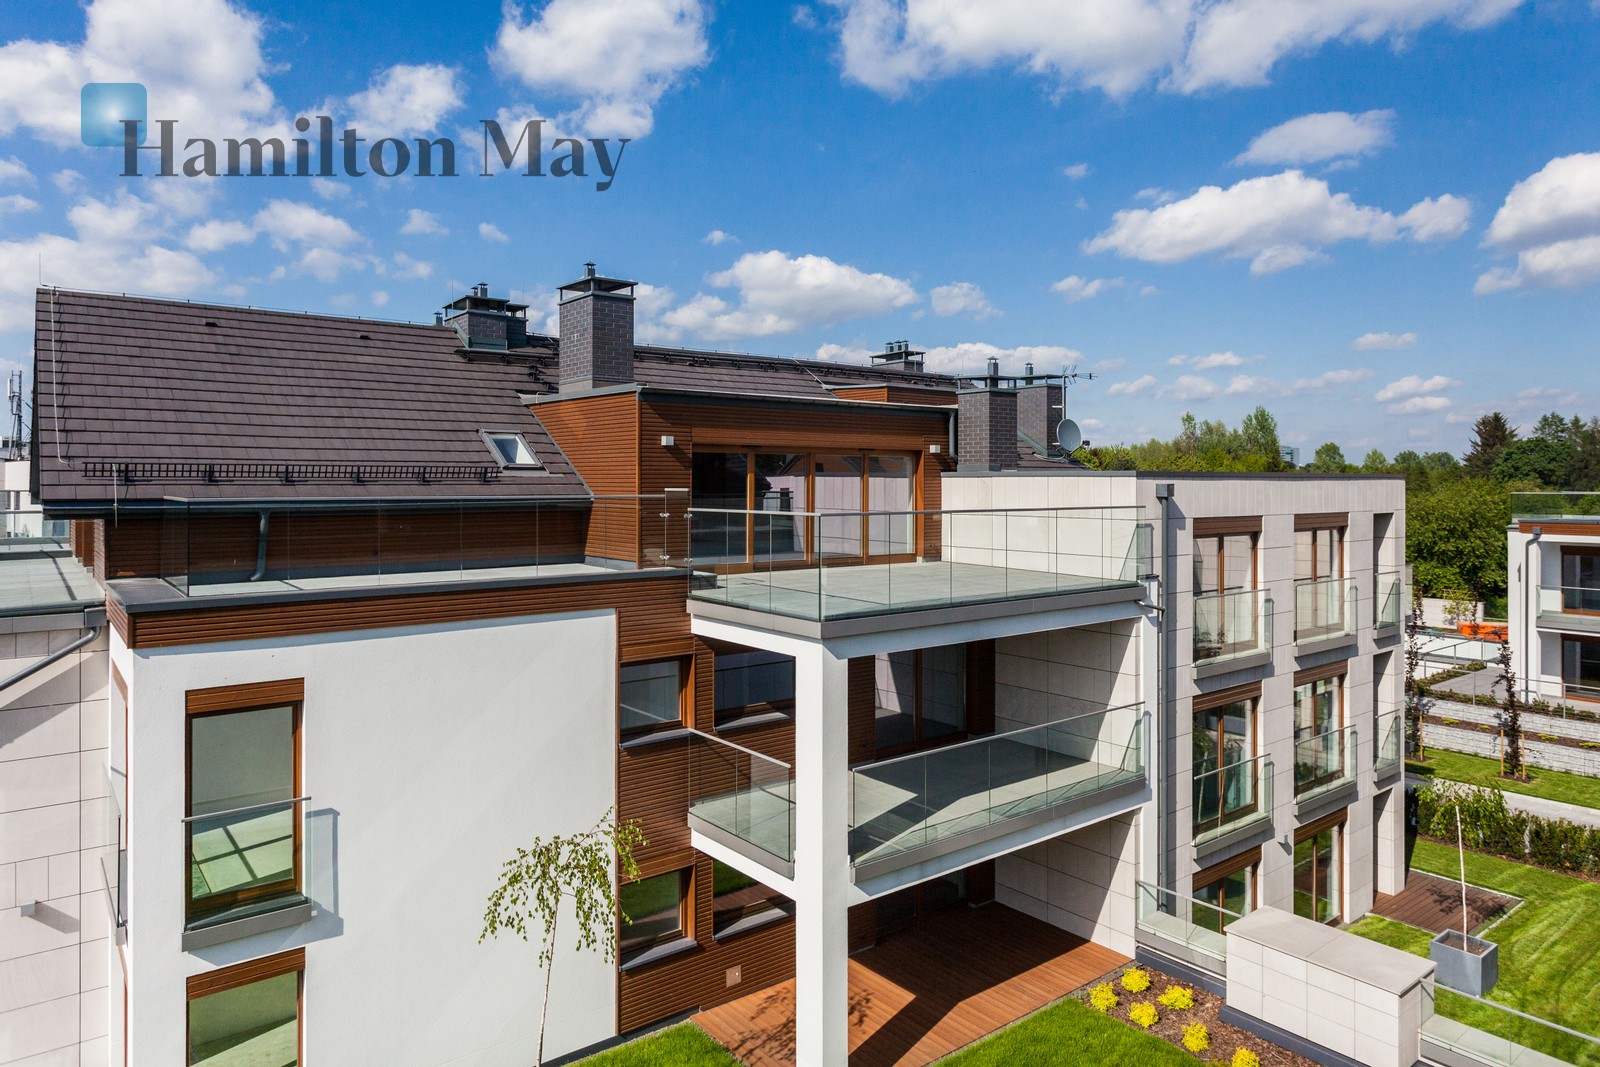 Subregion: Wola Justowska Level: 3 Status: existing Number of units: 40 Sale price from: 719000PLN Avg. sales price/m2: 14000PLN Rental price from: 3800PLN Avg. rental price/m2: 65PLN - slider